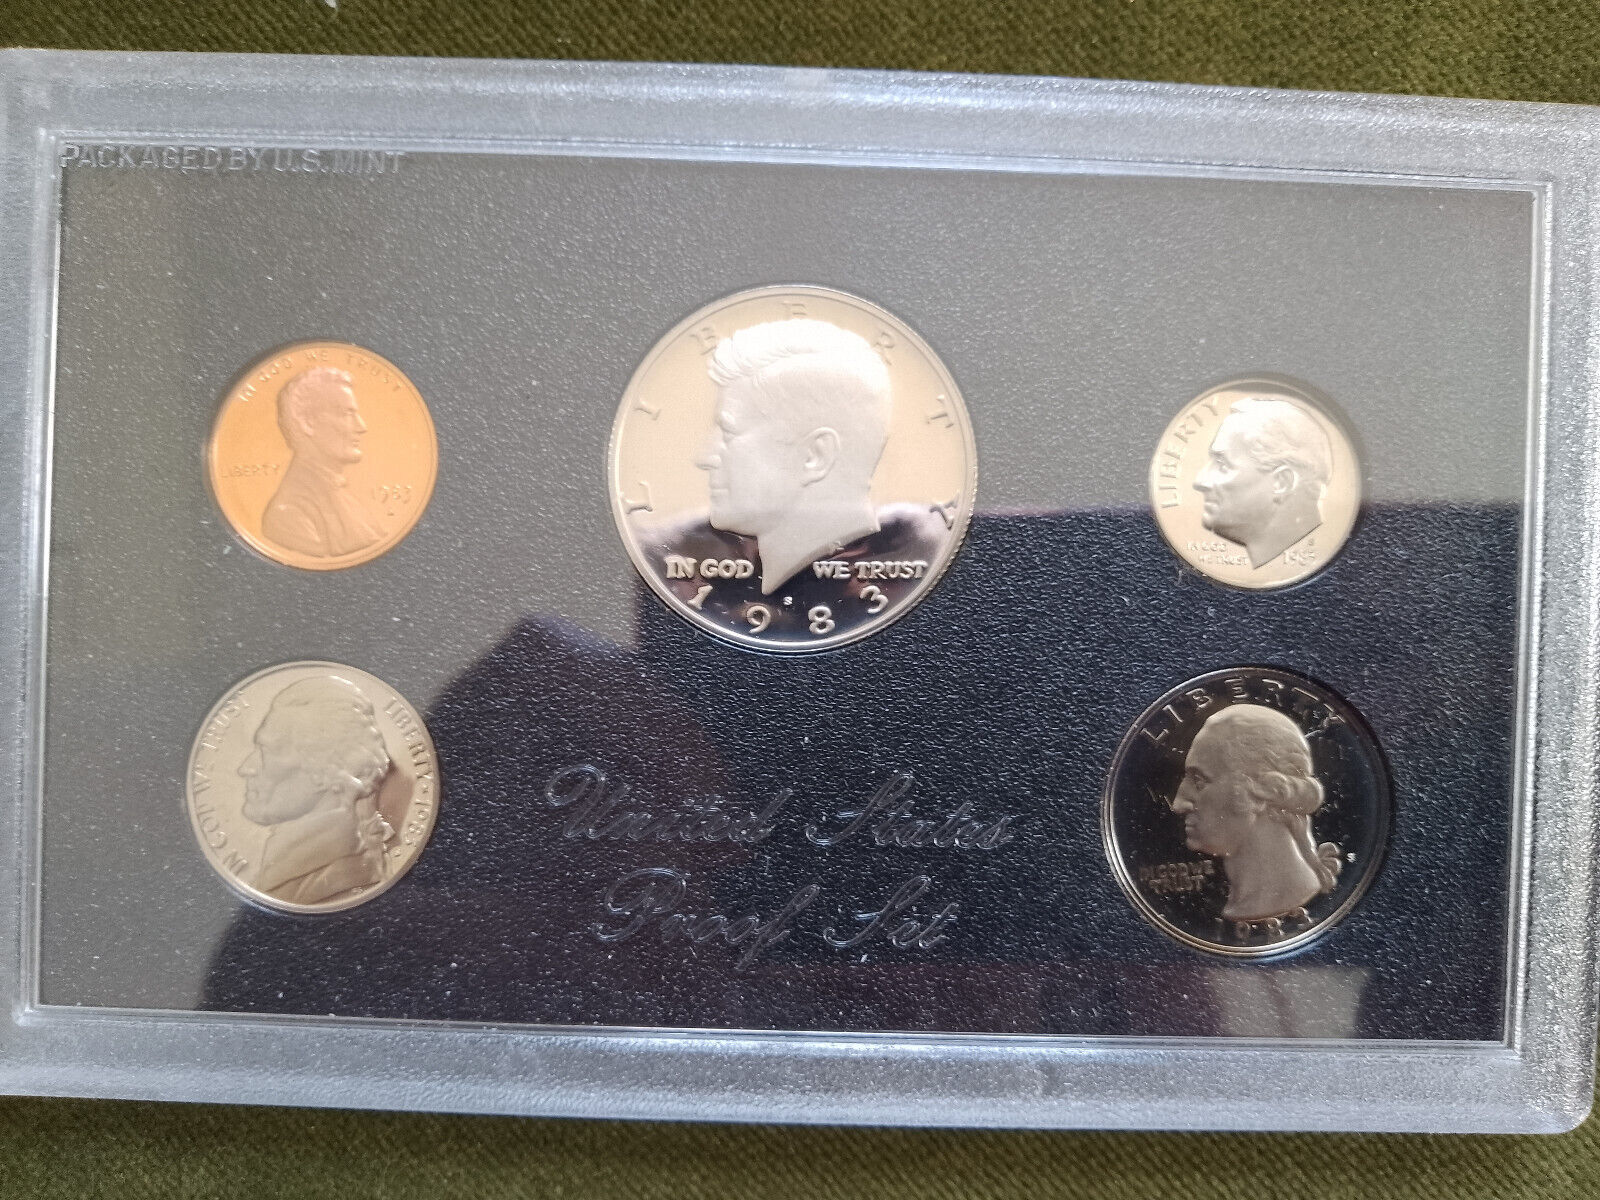 Primary image for 1983 Clad Proof Sets | U.S. Mint | Original Government Packaging OGP | 5 Coins